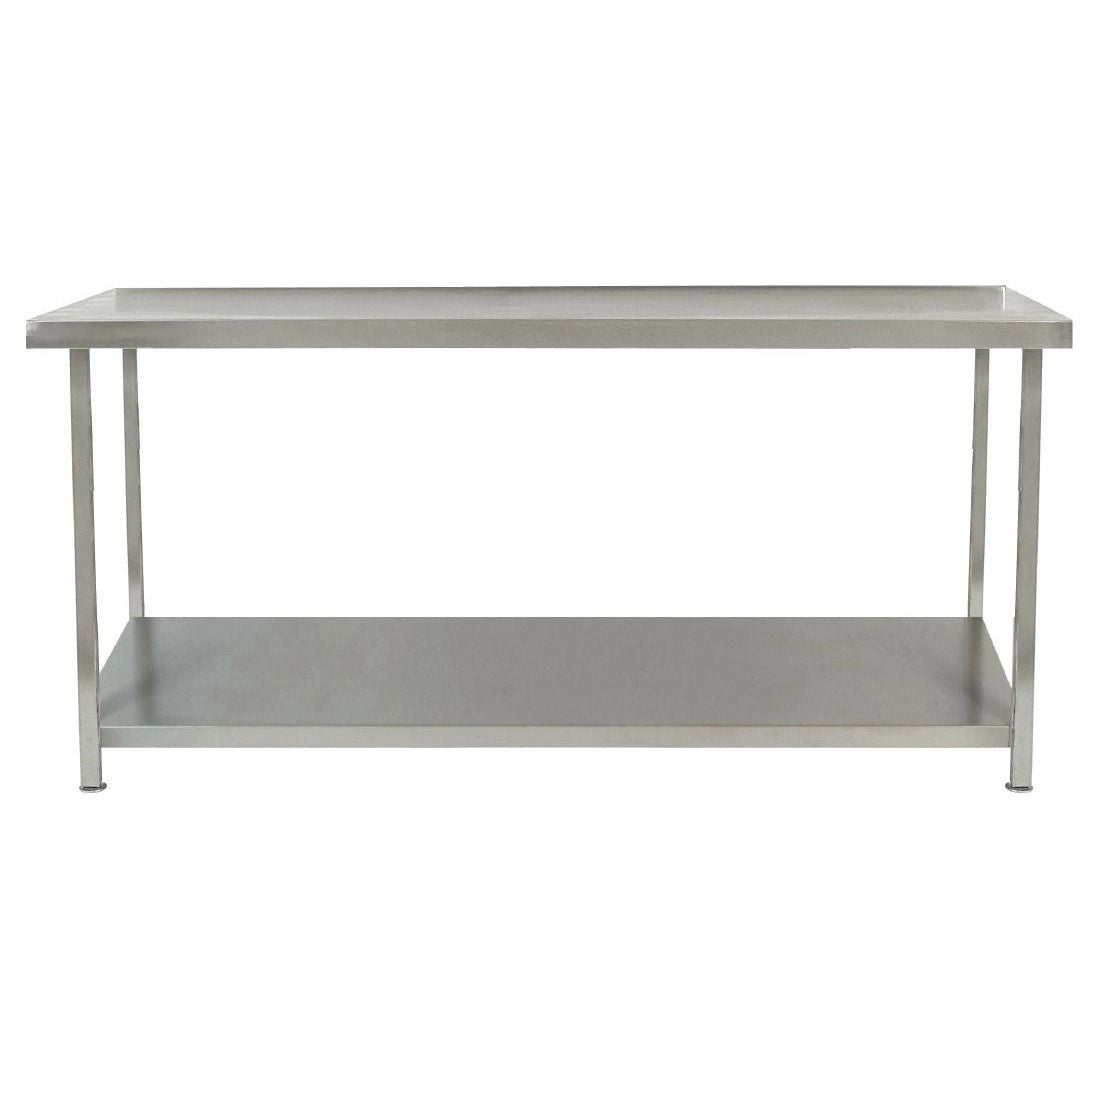 Parry Fully Welded Stainless Steel Centre Table with Undershelf 1200x650mm - DC606